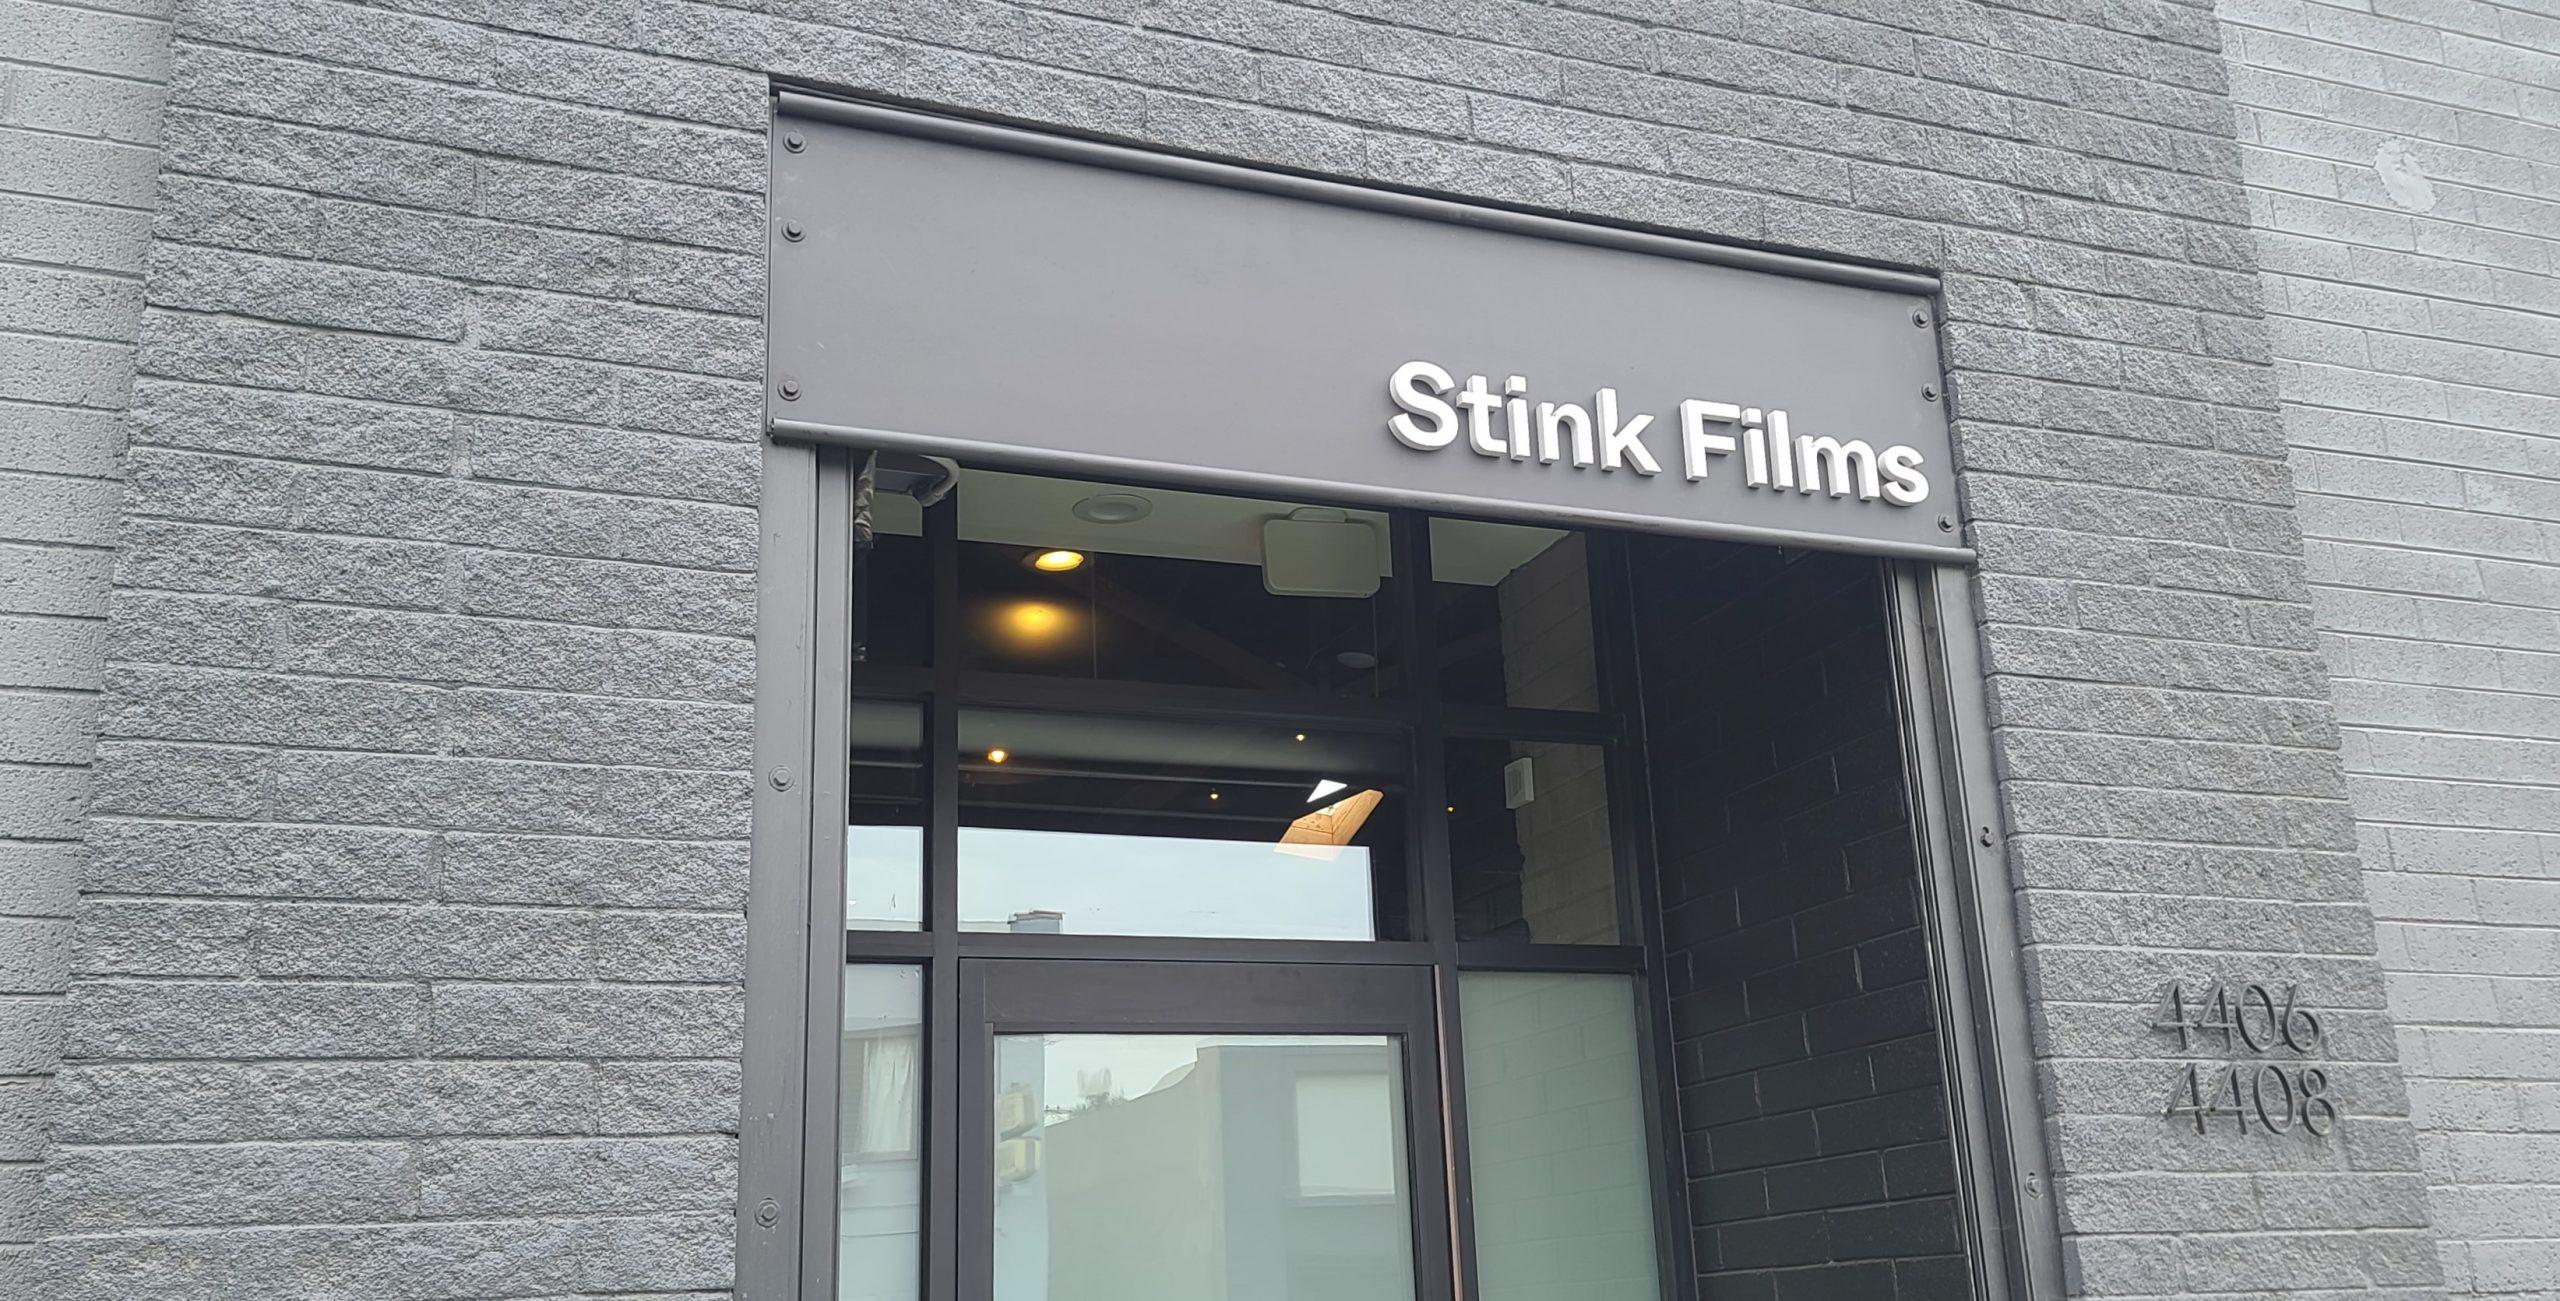 You are currently viewing Metal Letters Entrance Sign for Stink Films in Los Angeles